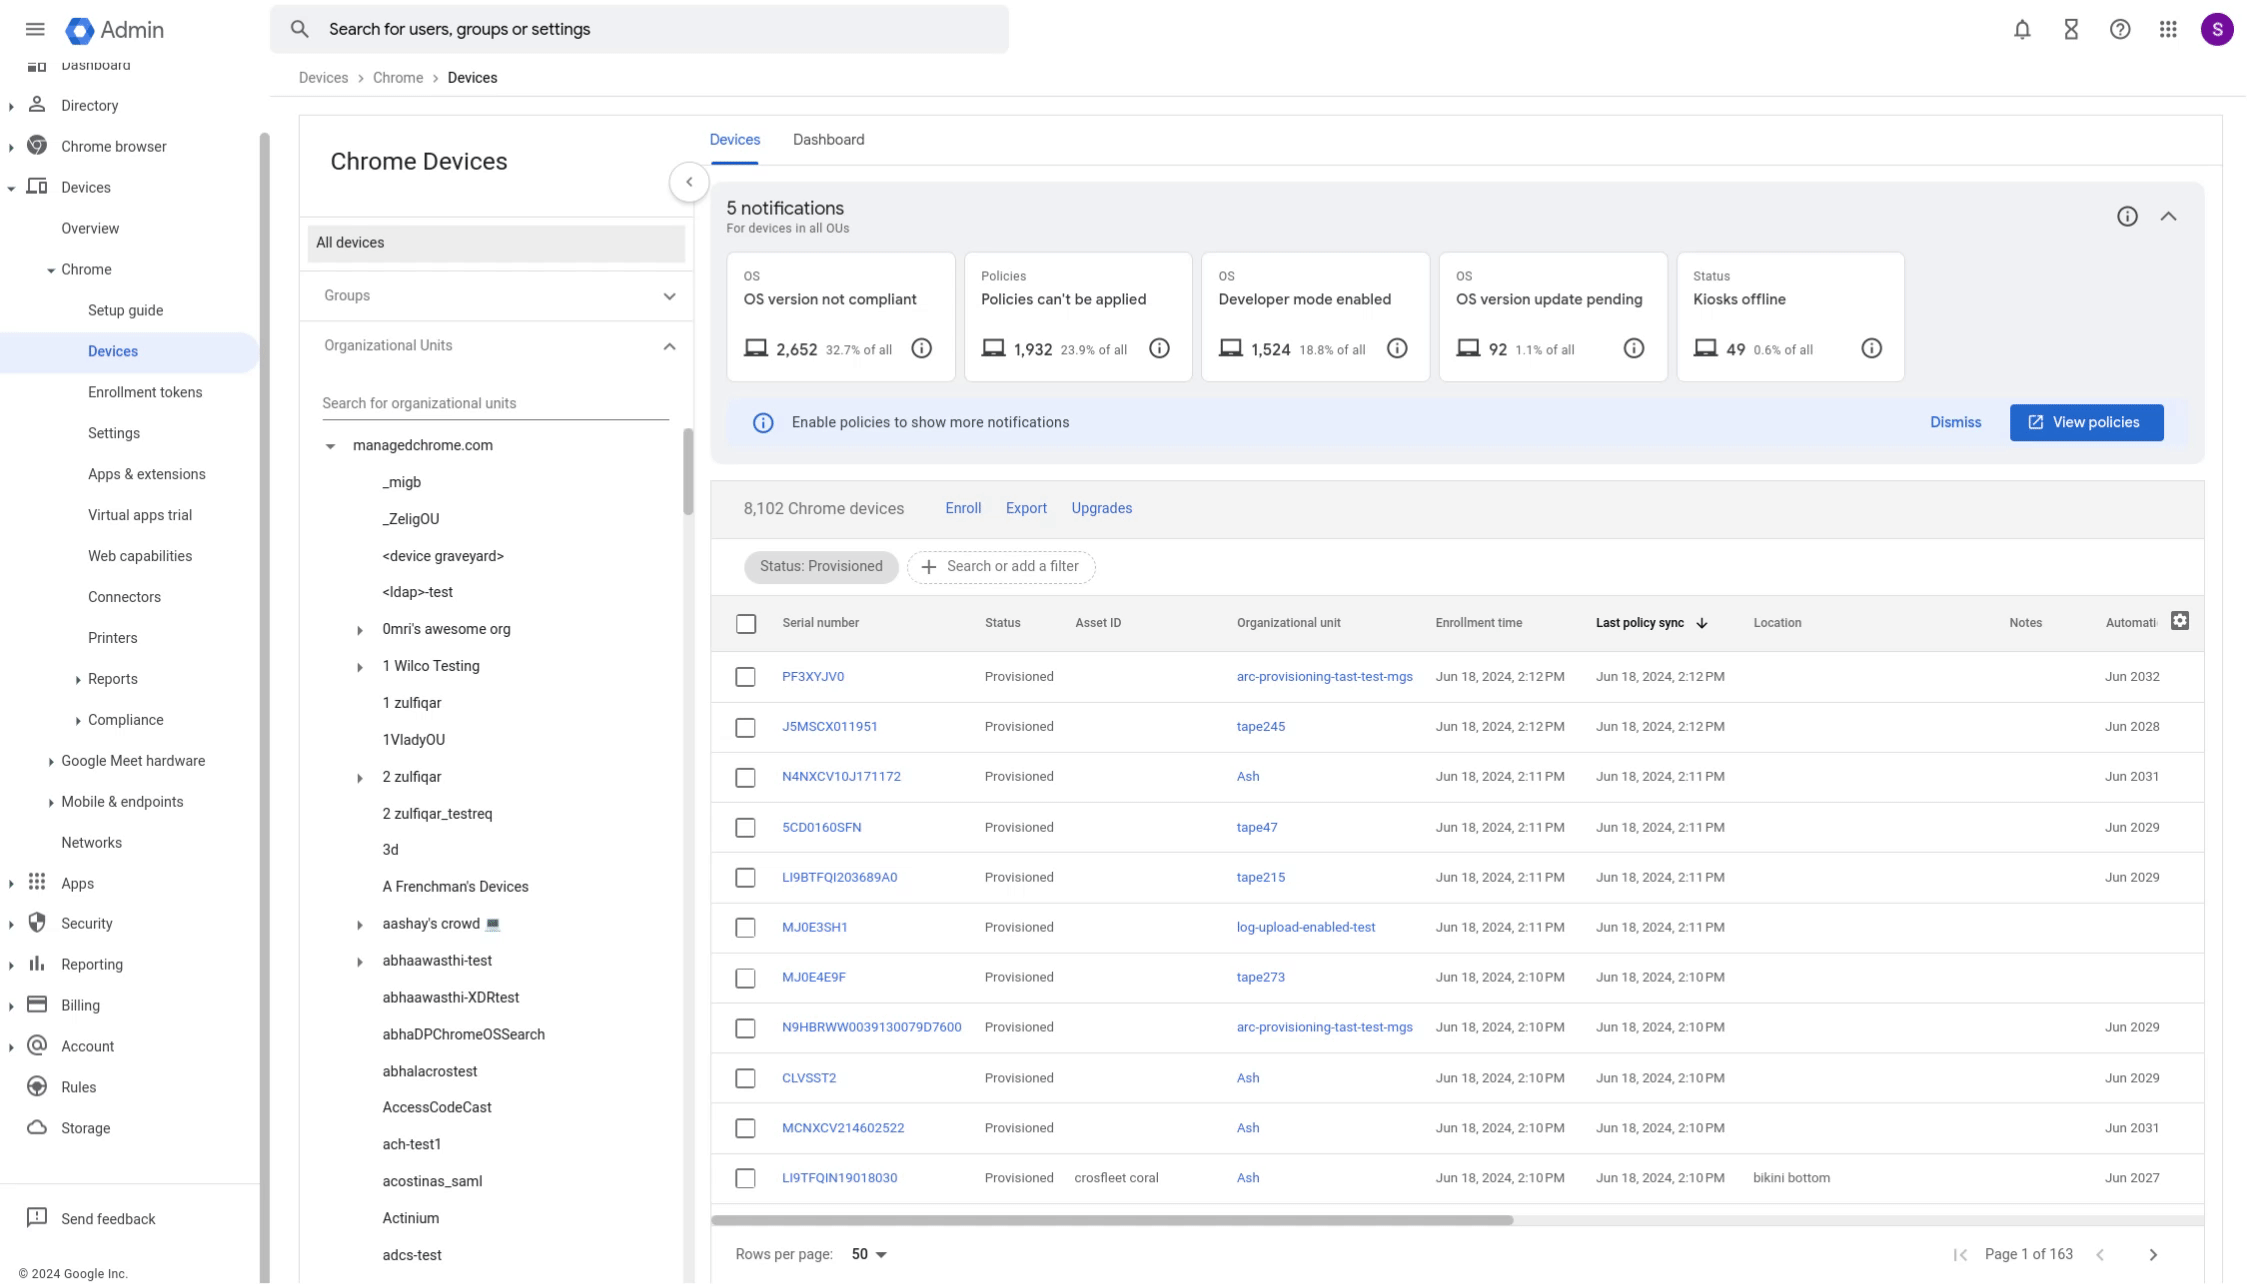 Gif of scrolling through pages in the device hub in Google admin console